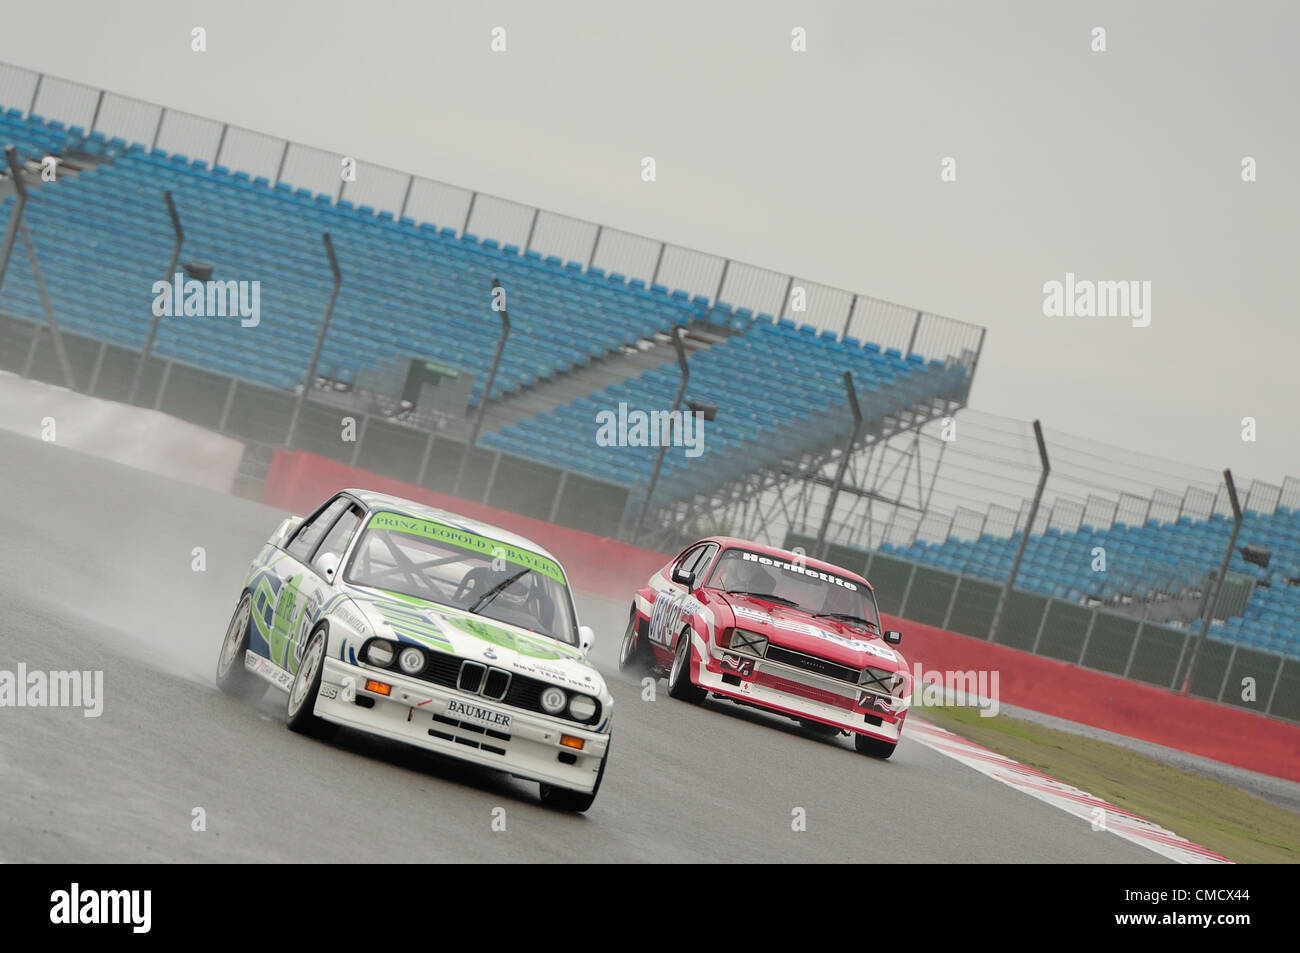 20th July 2012, Silverstone, UK  Tom Pochciol's Ford Capri, and Don Grice's BMW M3 DTM in the rain during qualifying for the Fujifilm Touring Car Trophy 1970-2000 race at Silverstone Classic 2012 Stock Photo